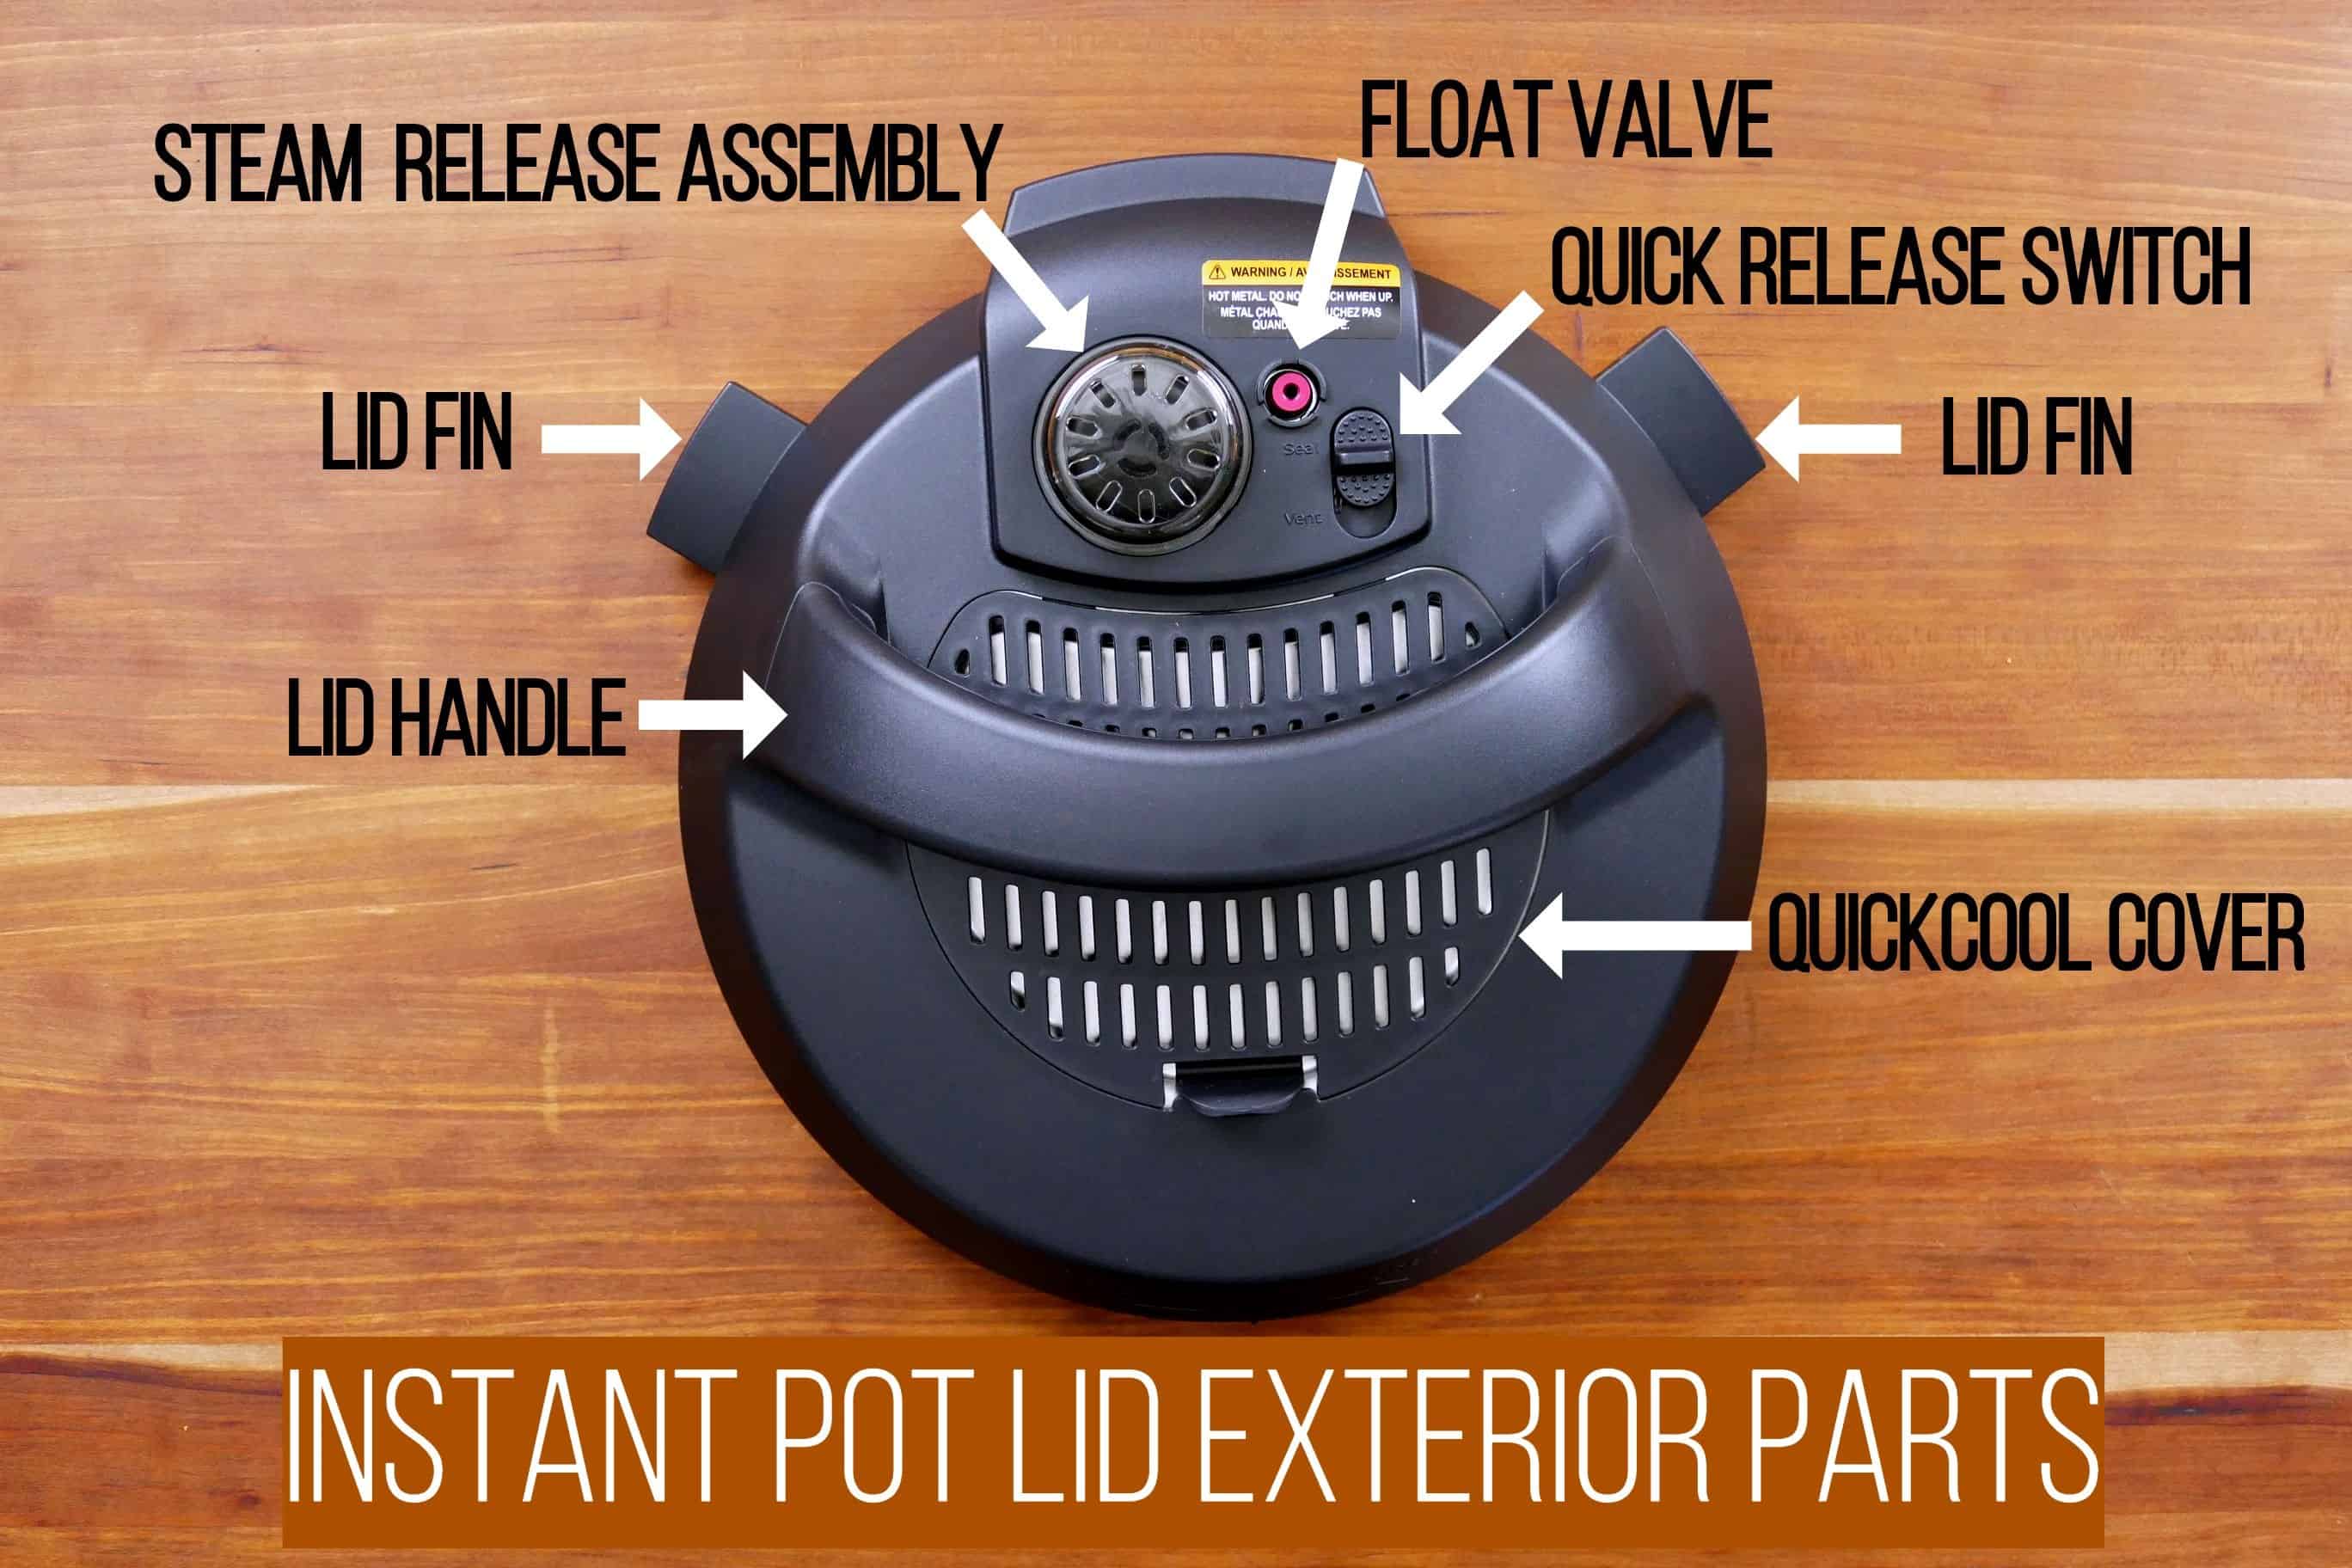 Instant Pot Pro lid exterior parts - lid handle, lid fin, steam release assembly, float valve, quick release switch, lid fin, quickcool cover - Paint the Kitchen Red